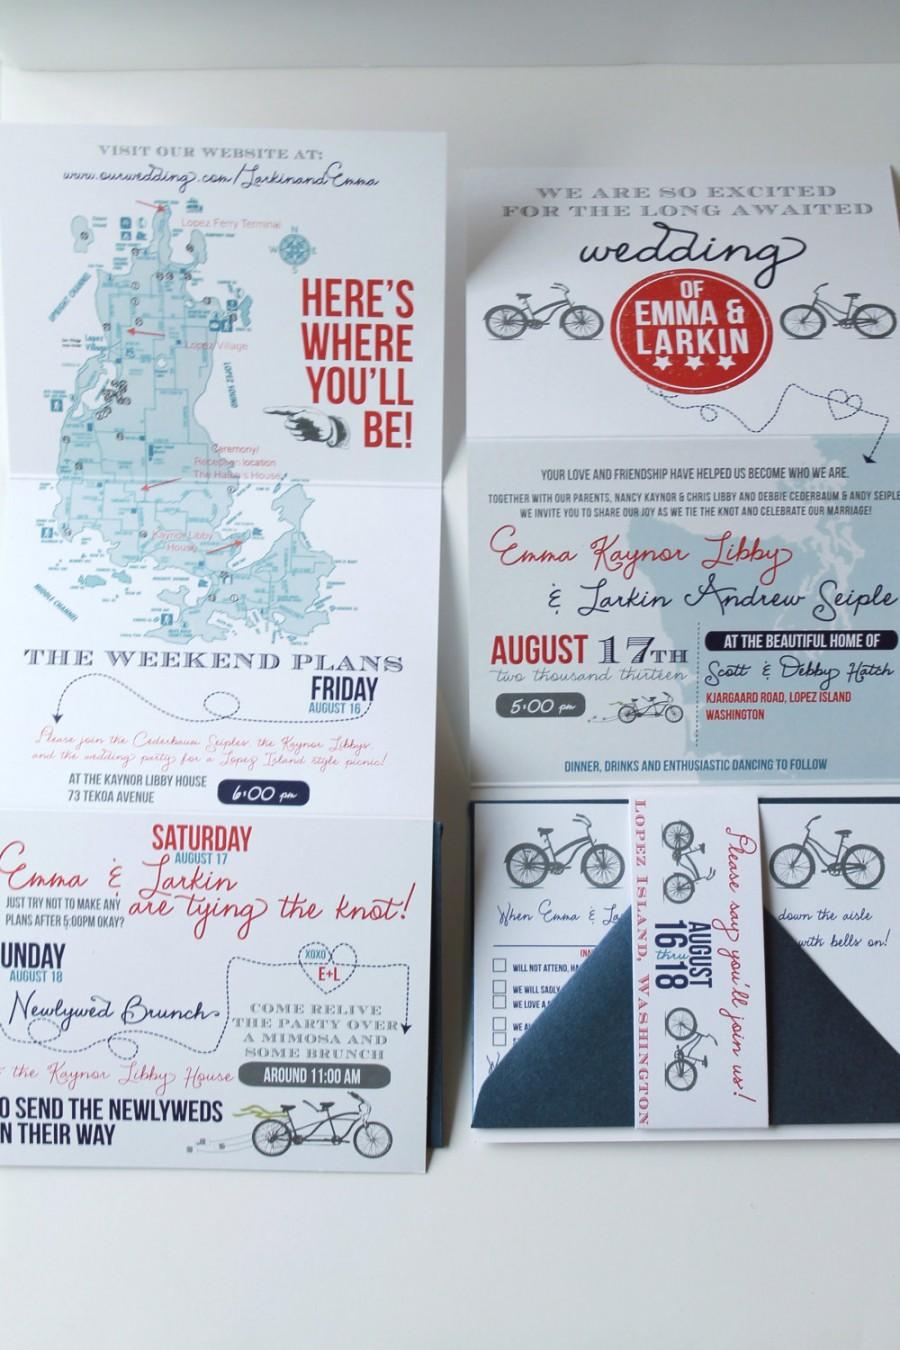 Wedding - Z-fold wedding invitation with casual bike wedding weekend itinerary, unique invite with bellyband typography map design - DEPOSIT LISTING